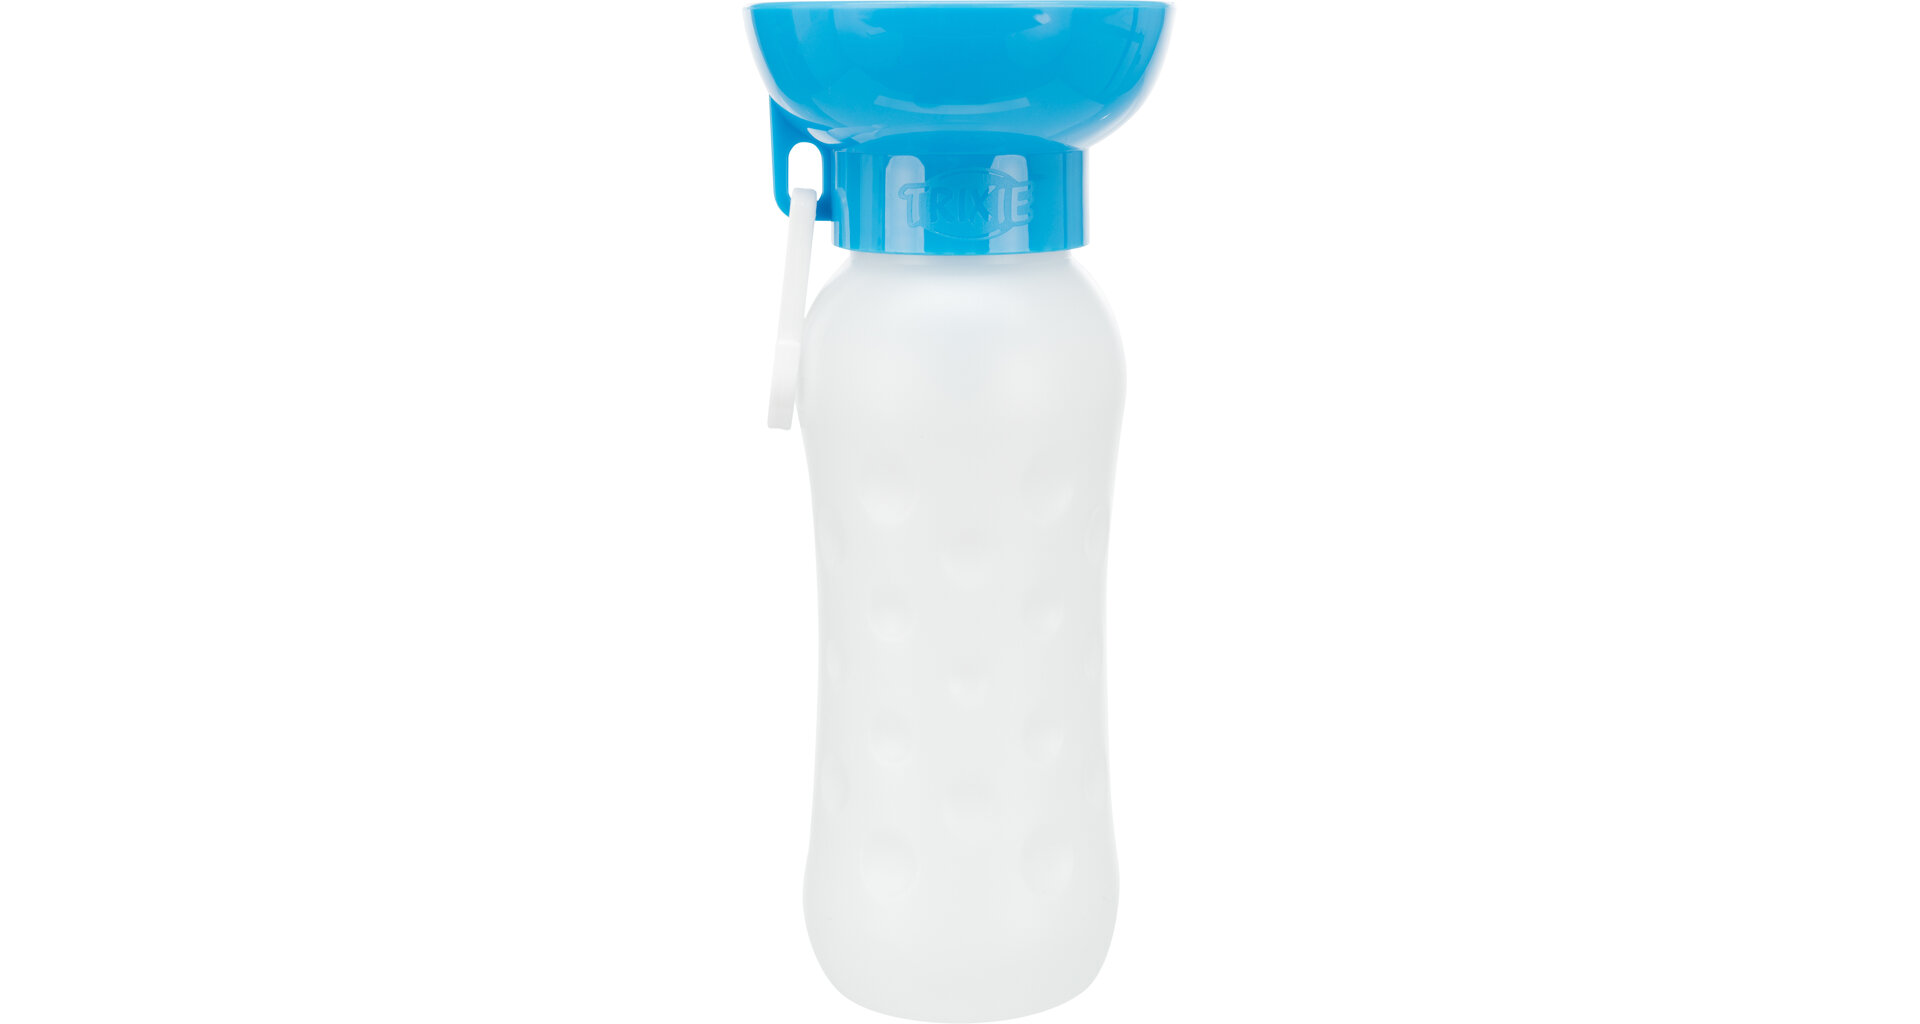 Trixie Travel bottle with integrated bowl 0.55l